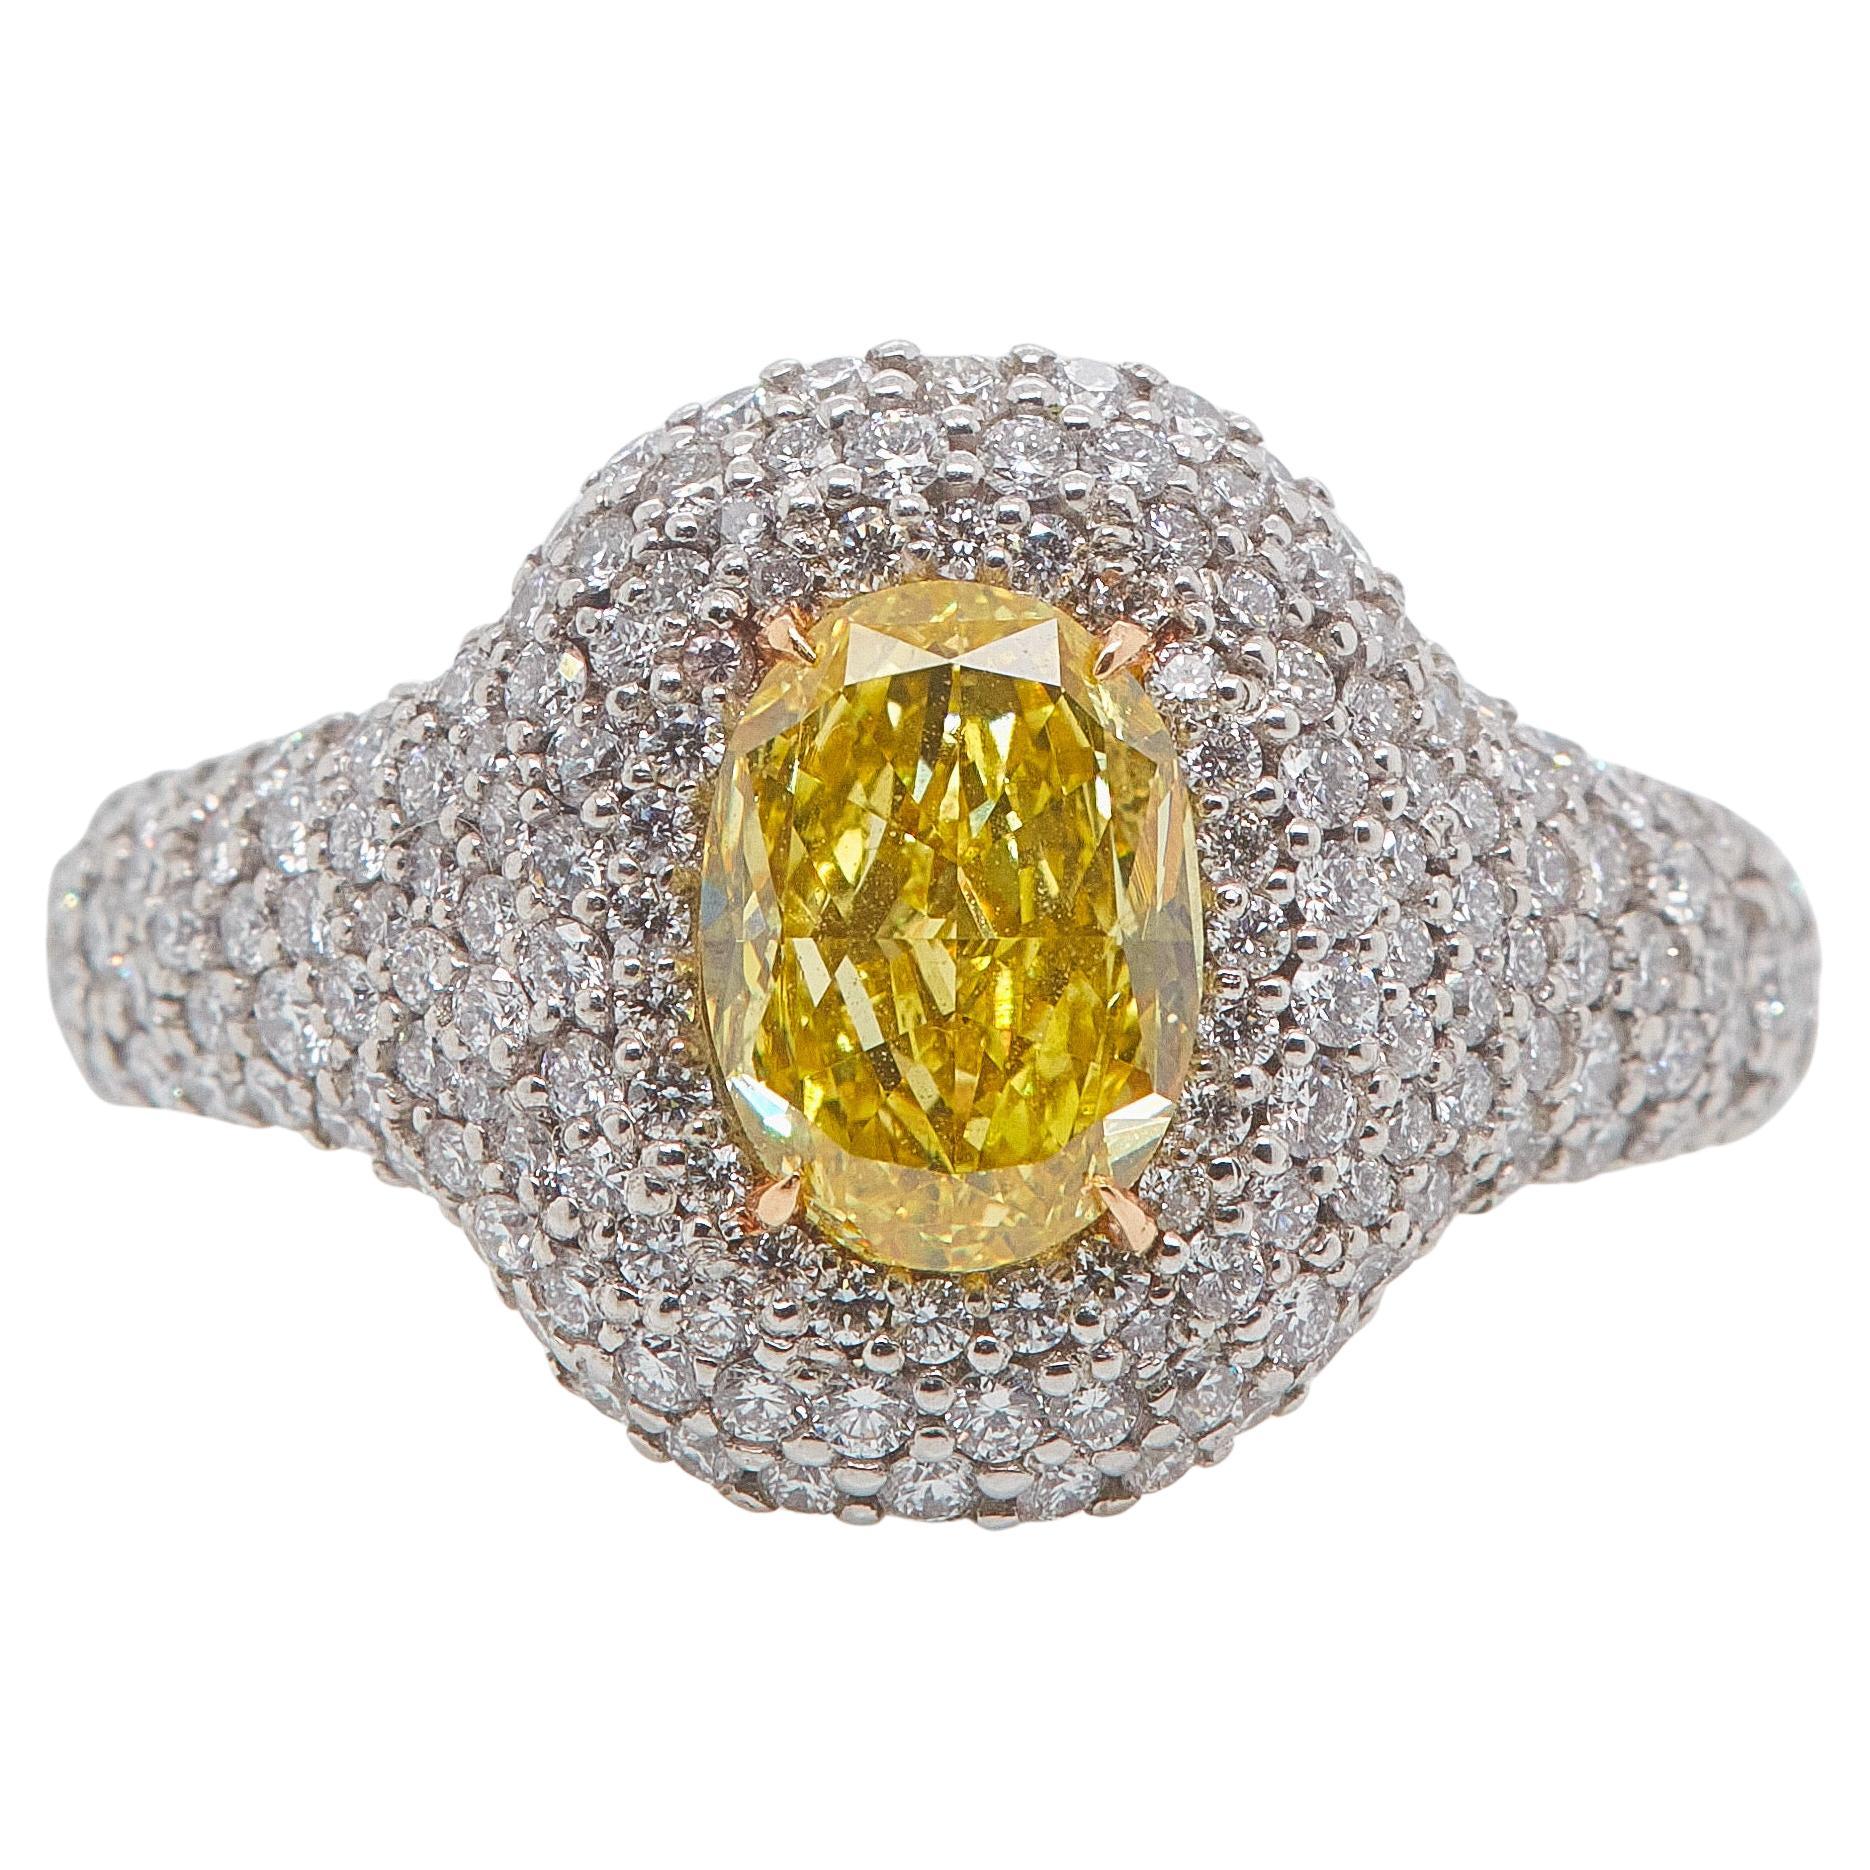 Cocktail Ring 1.70 Carat Fancy Vivid Yellow Oval Cut Diamond, GIA Certified For Sale